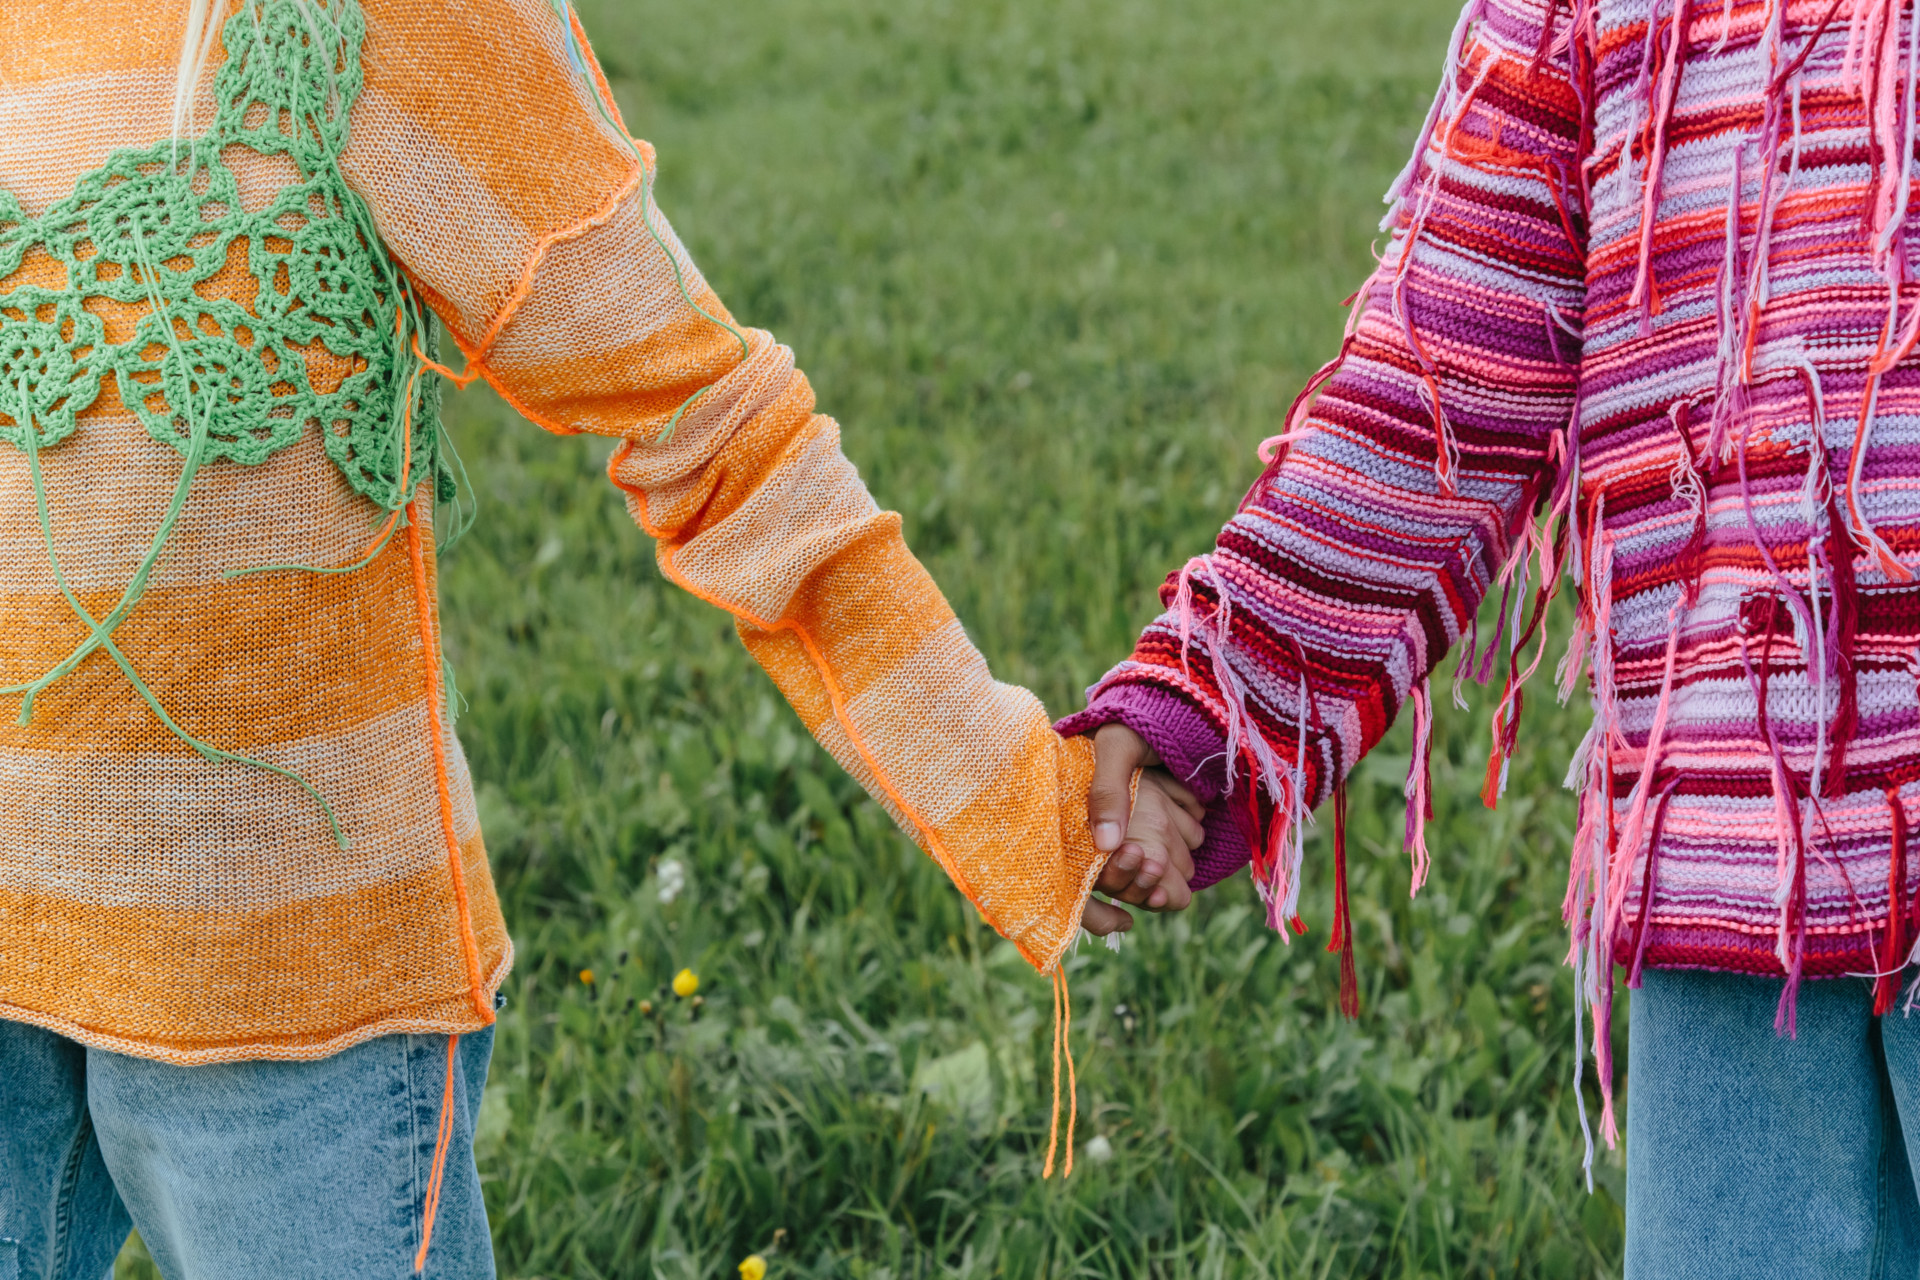 Two people holding hands in a field while wearing crochet jumpers